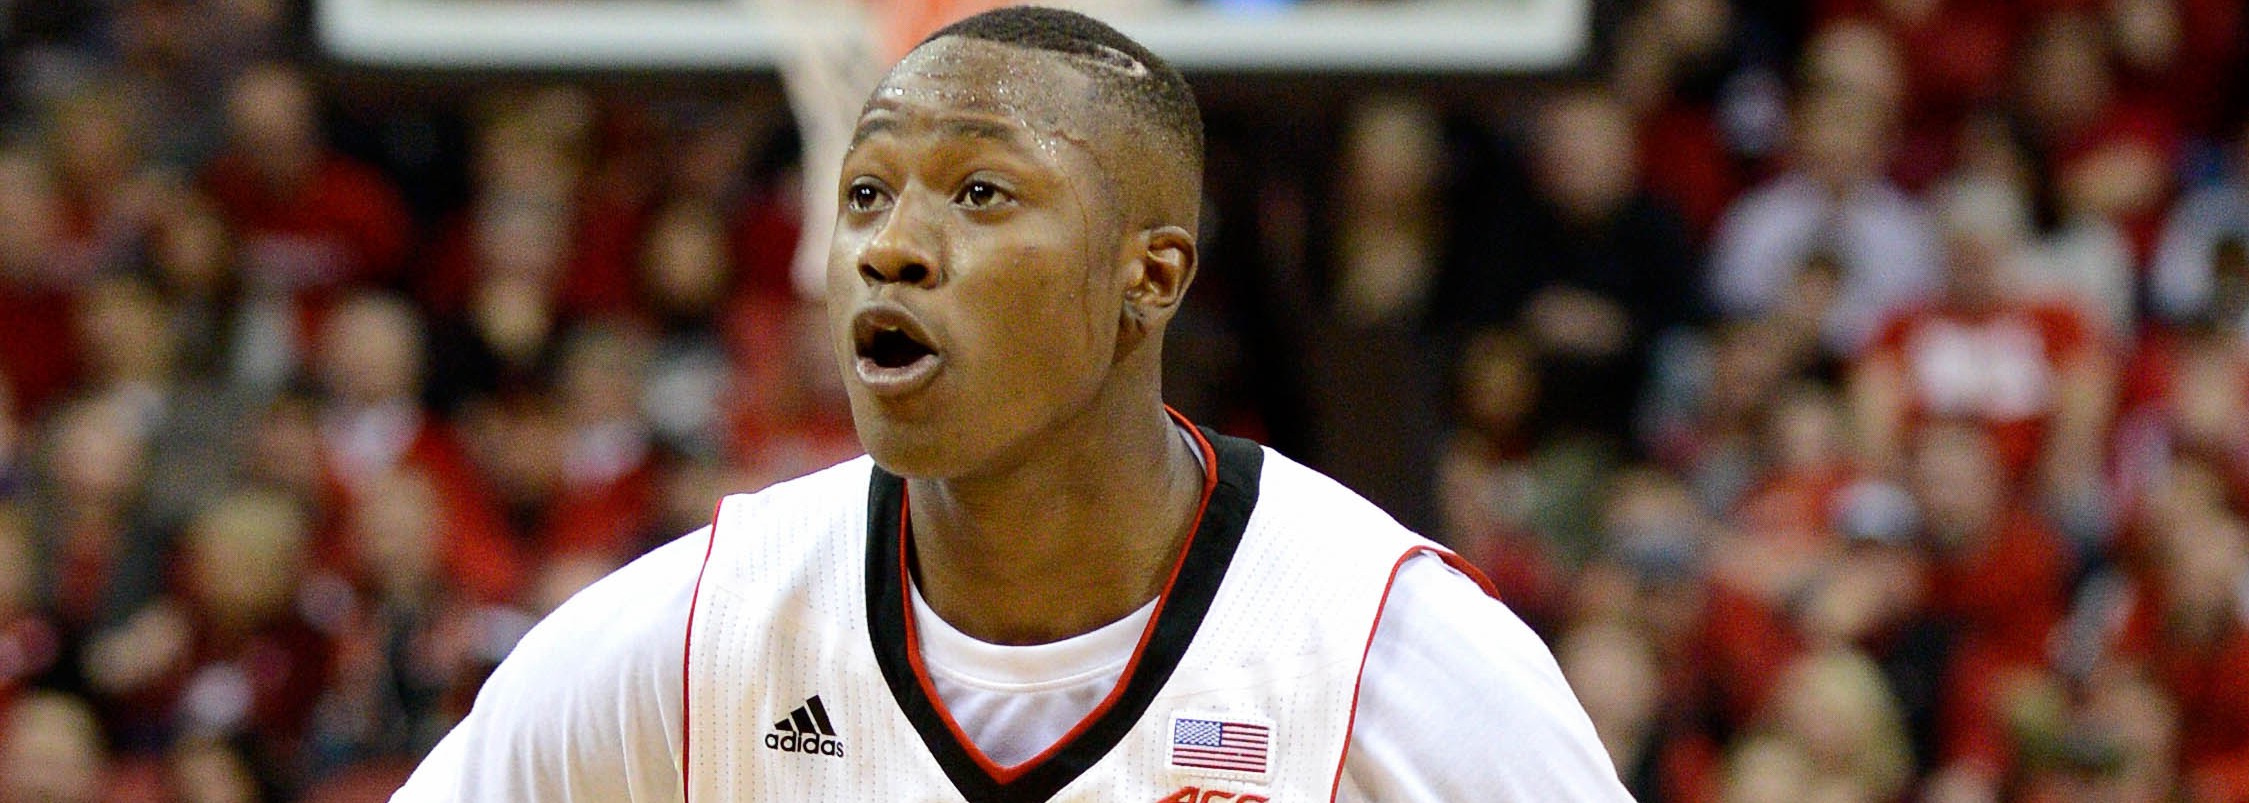 Terry Rozier Louisville vs. Miami 2-21-2015 Photo by Adam Creech Fitted